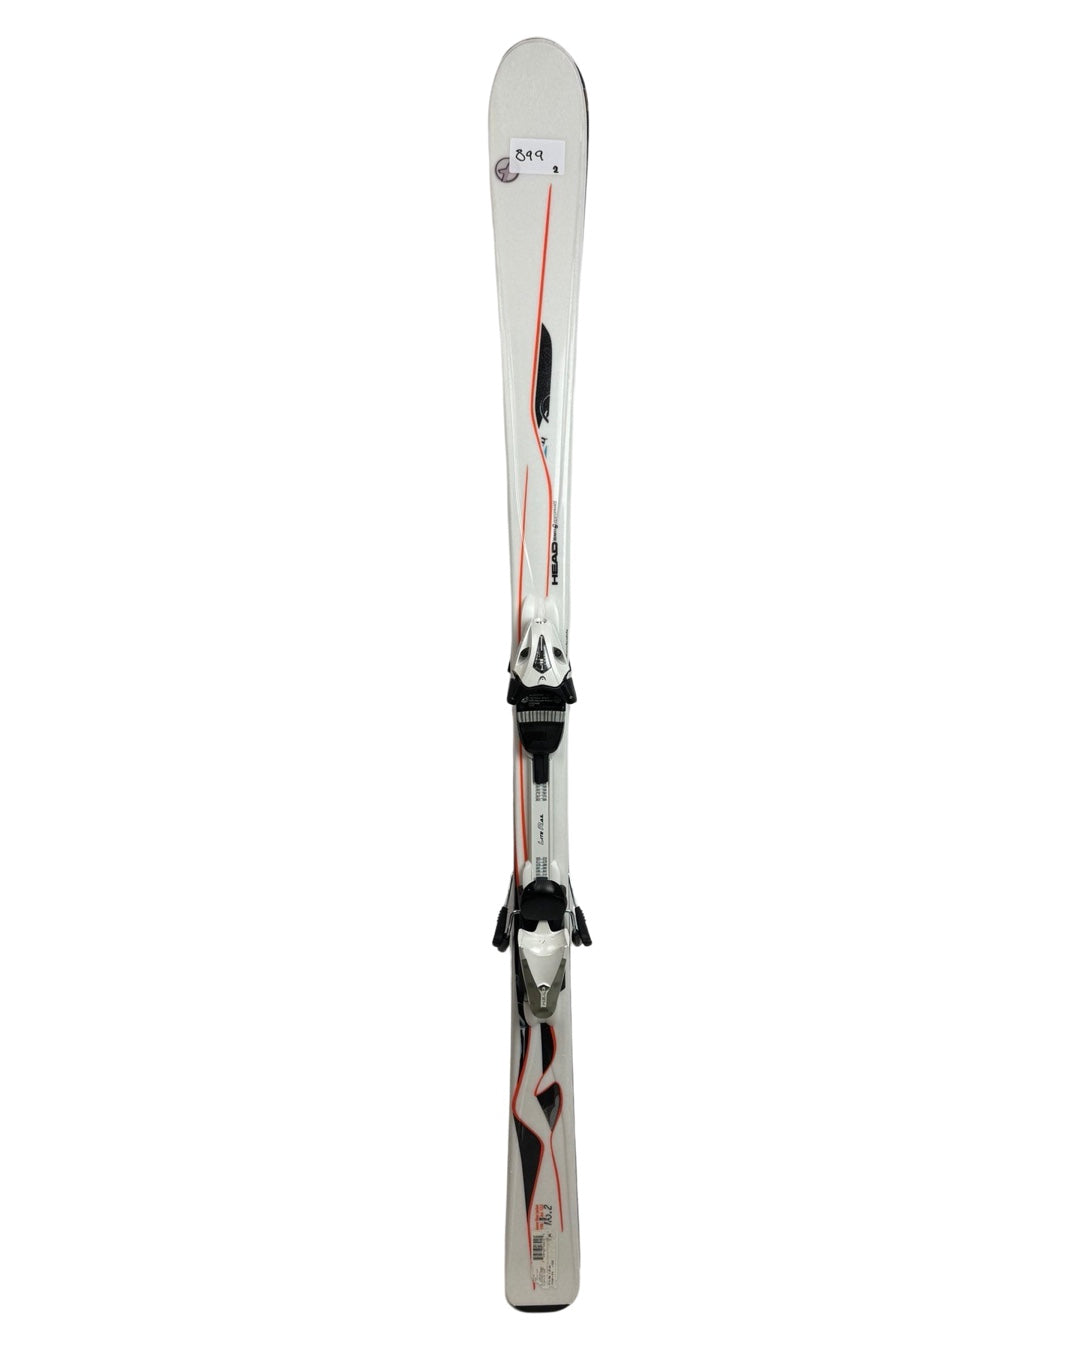 Adult skis - mixed 899